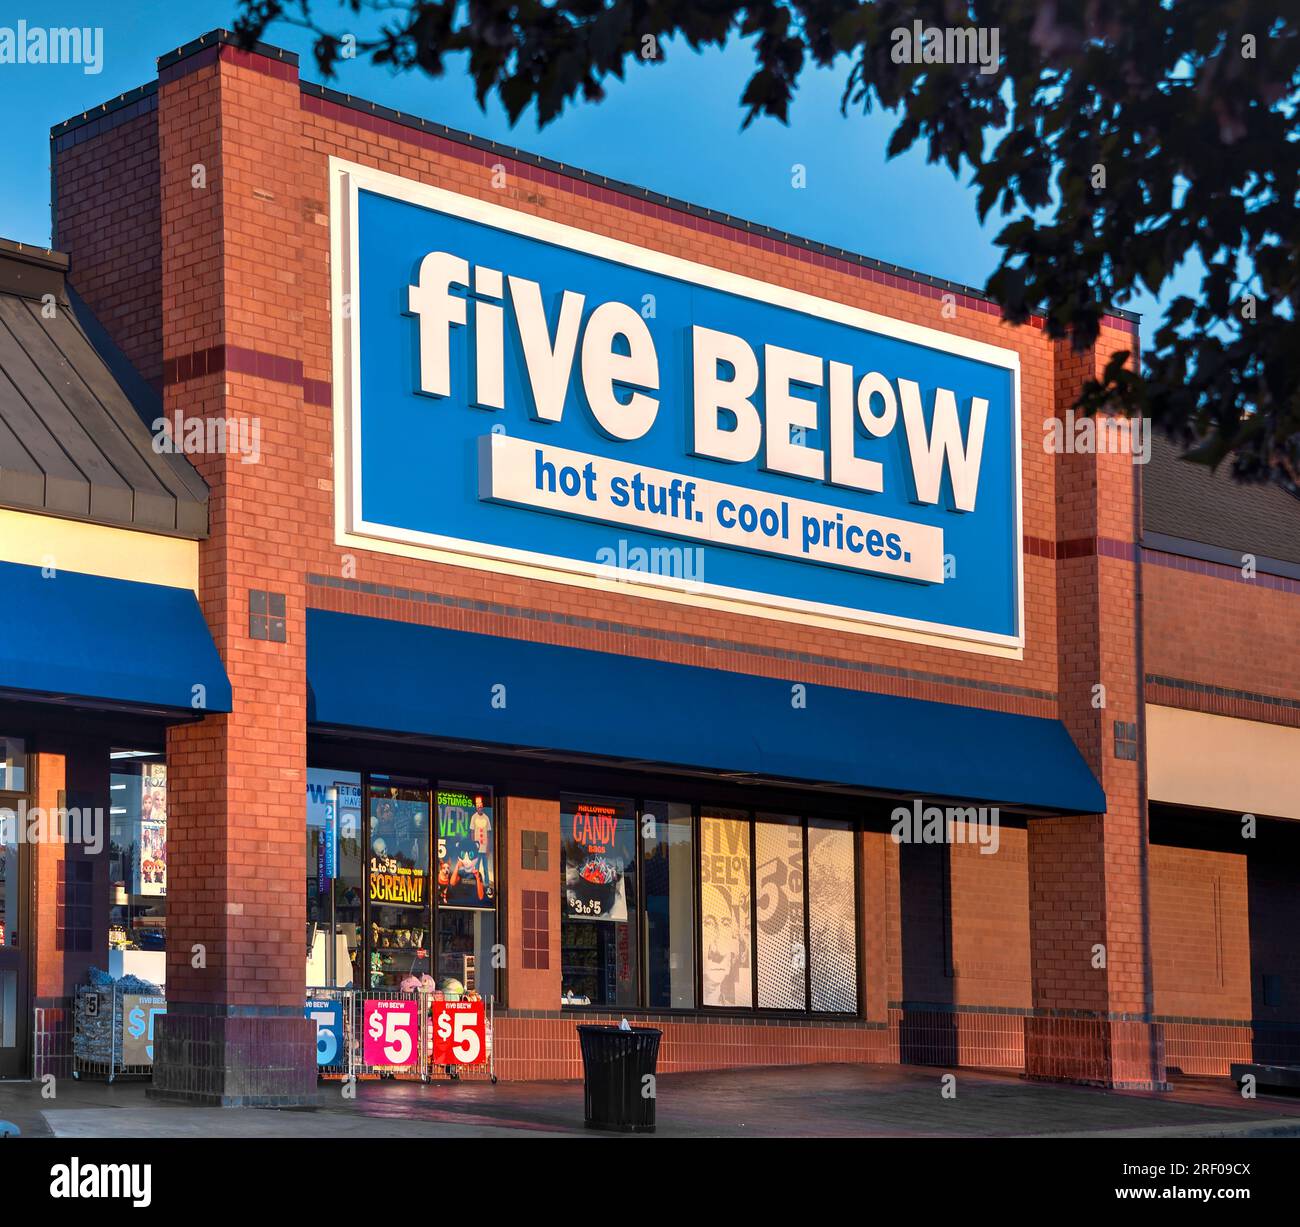 Springfield, Missouri - November 1, 2019: Five Below Inc. is an American chain of discount stores selling products costing up to $10. Stock Photo